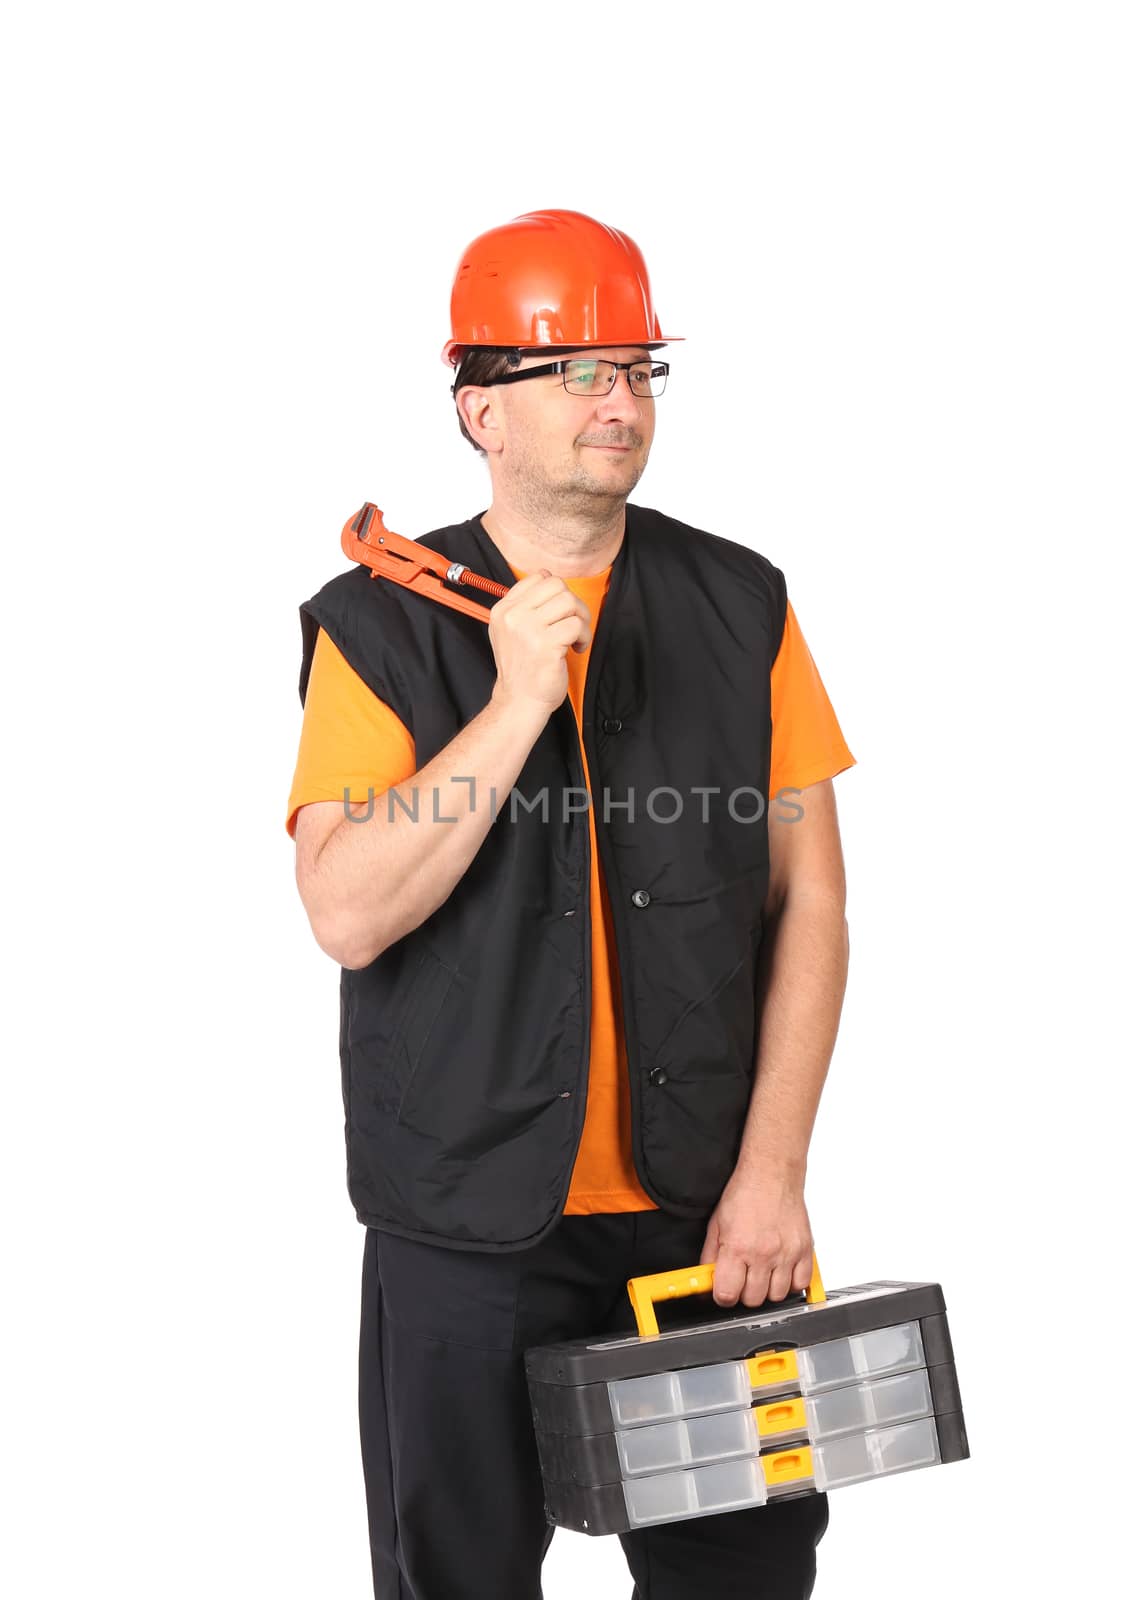 Man in workwear and red hard hat with tool box wrench